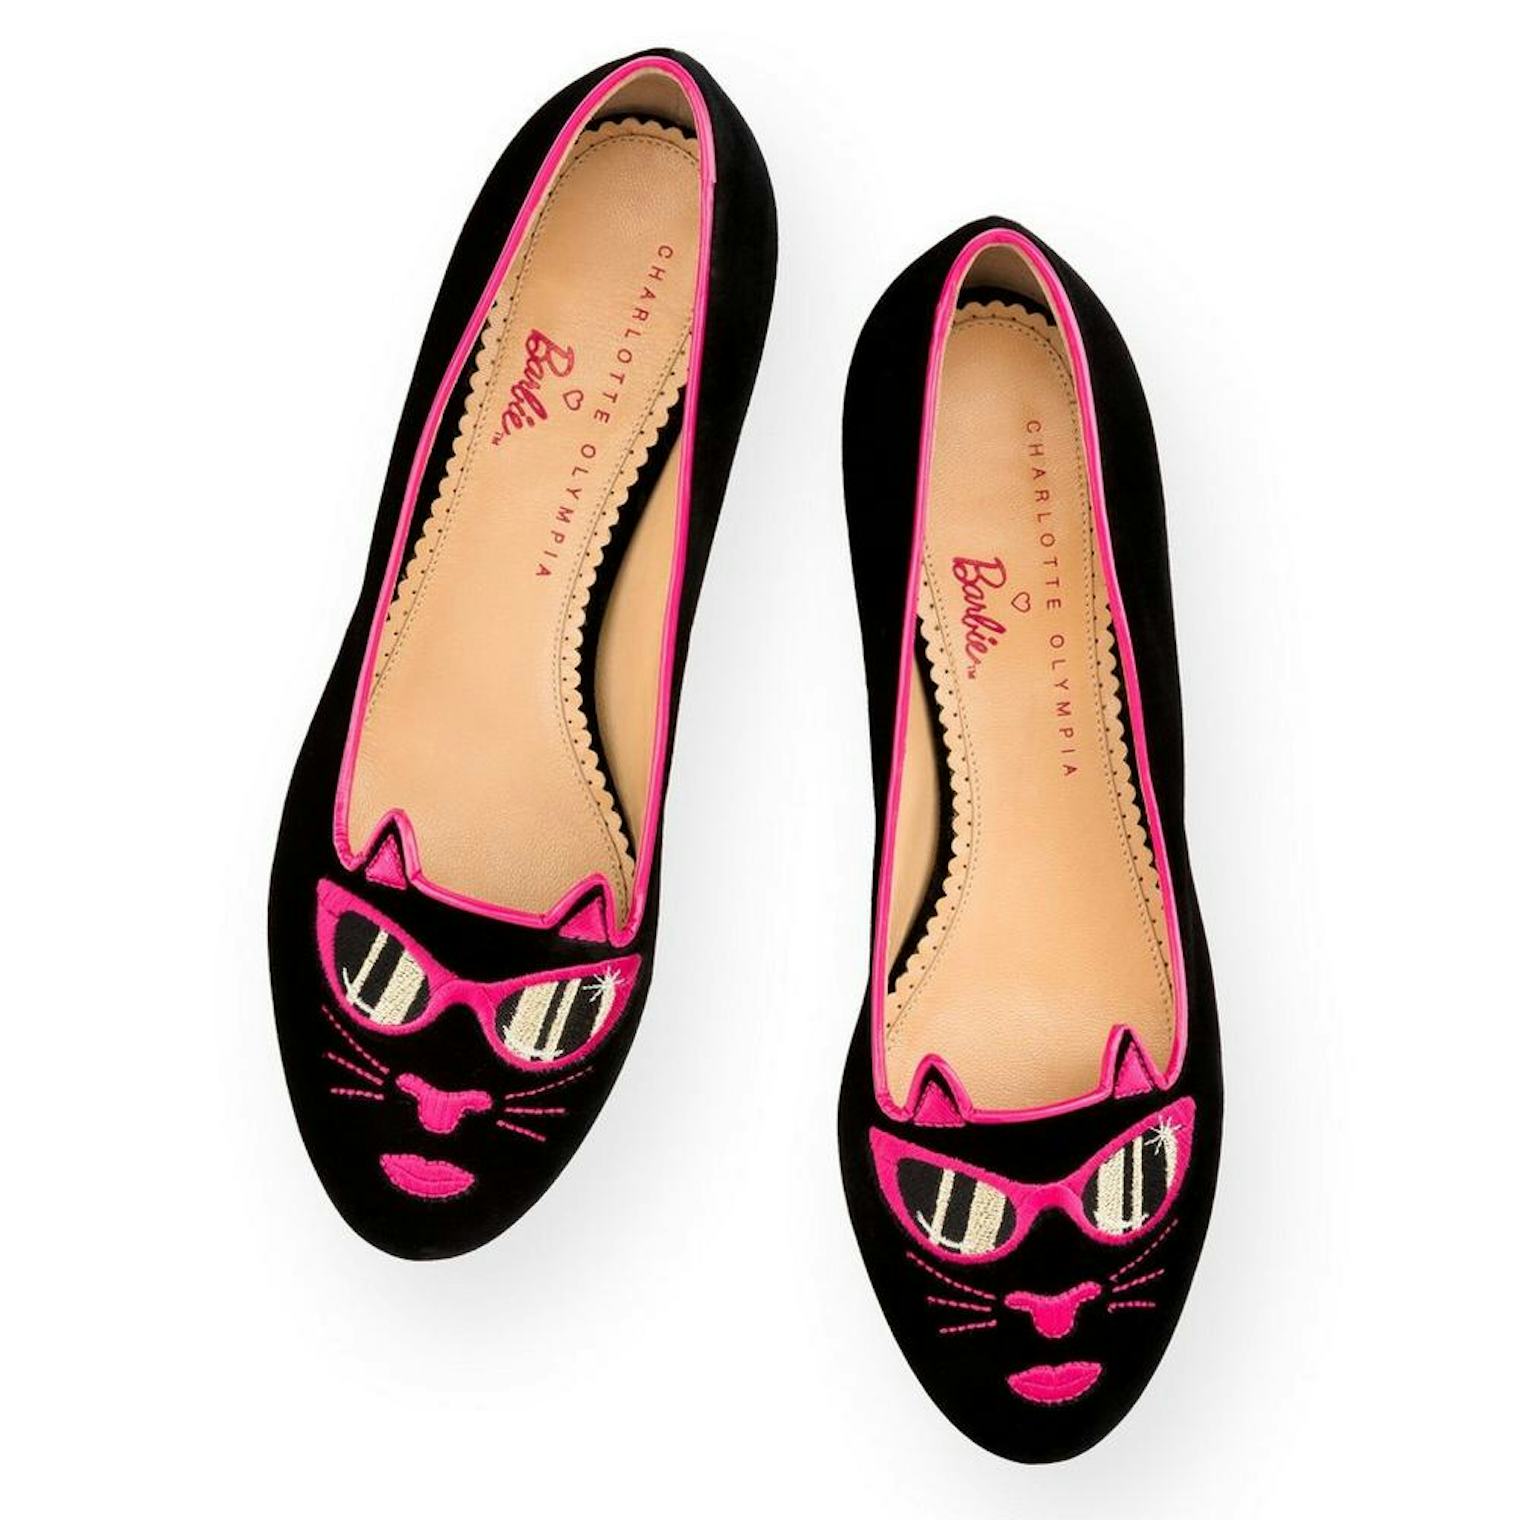 Charlotte Olympia And Barbie Collaborated On A New Collection